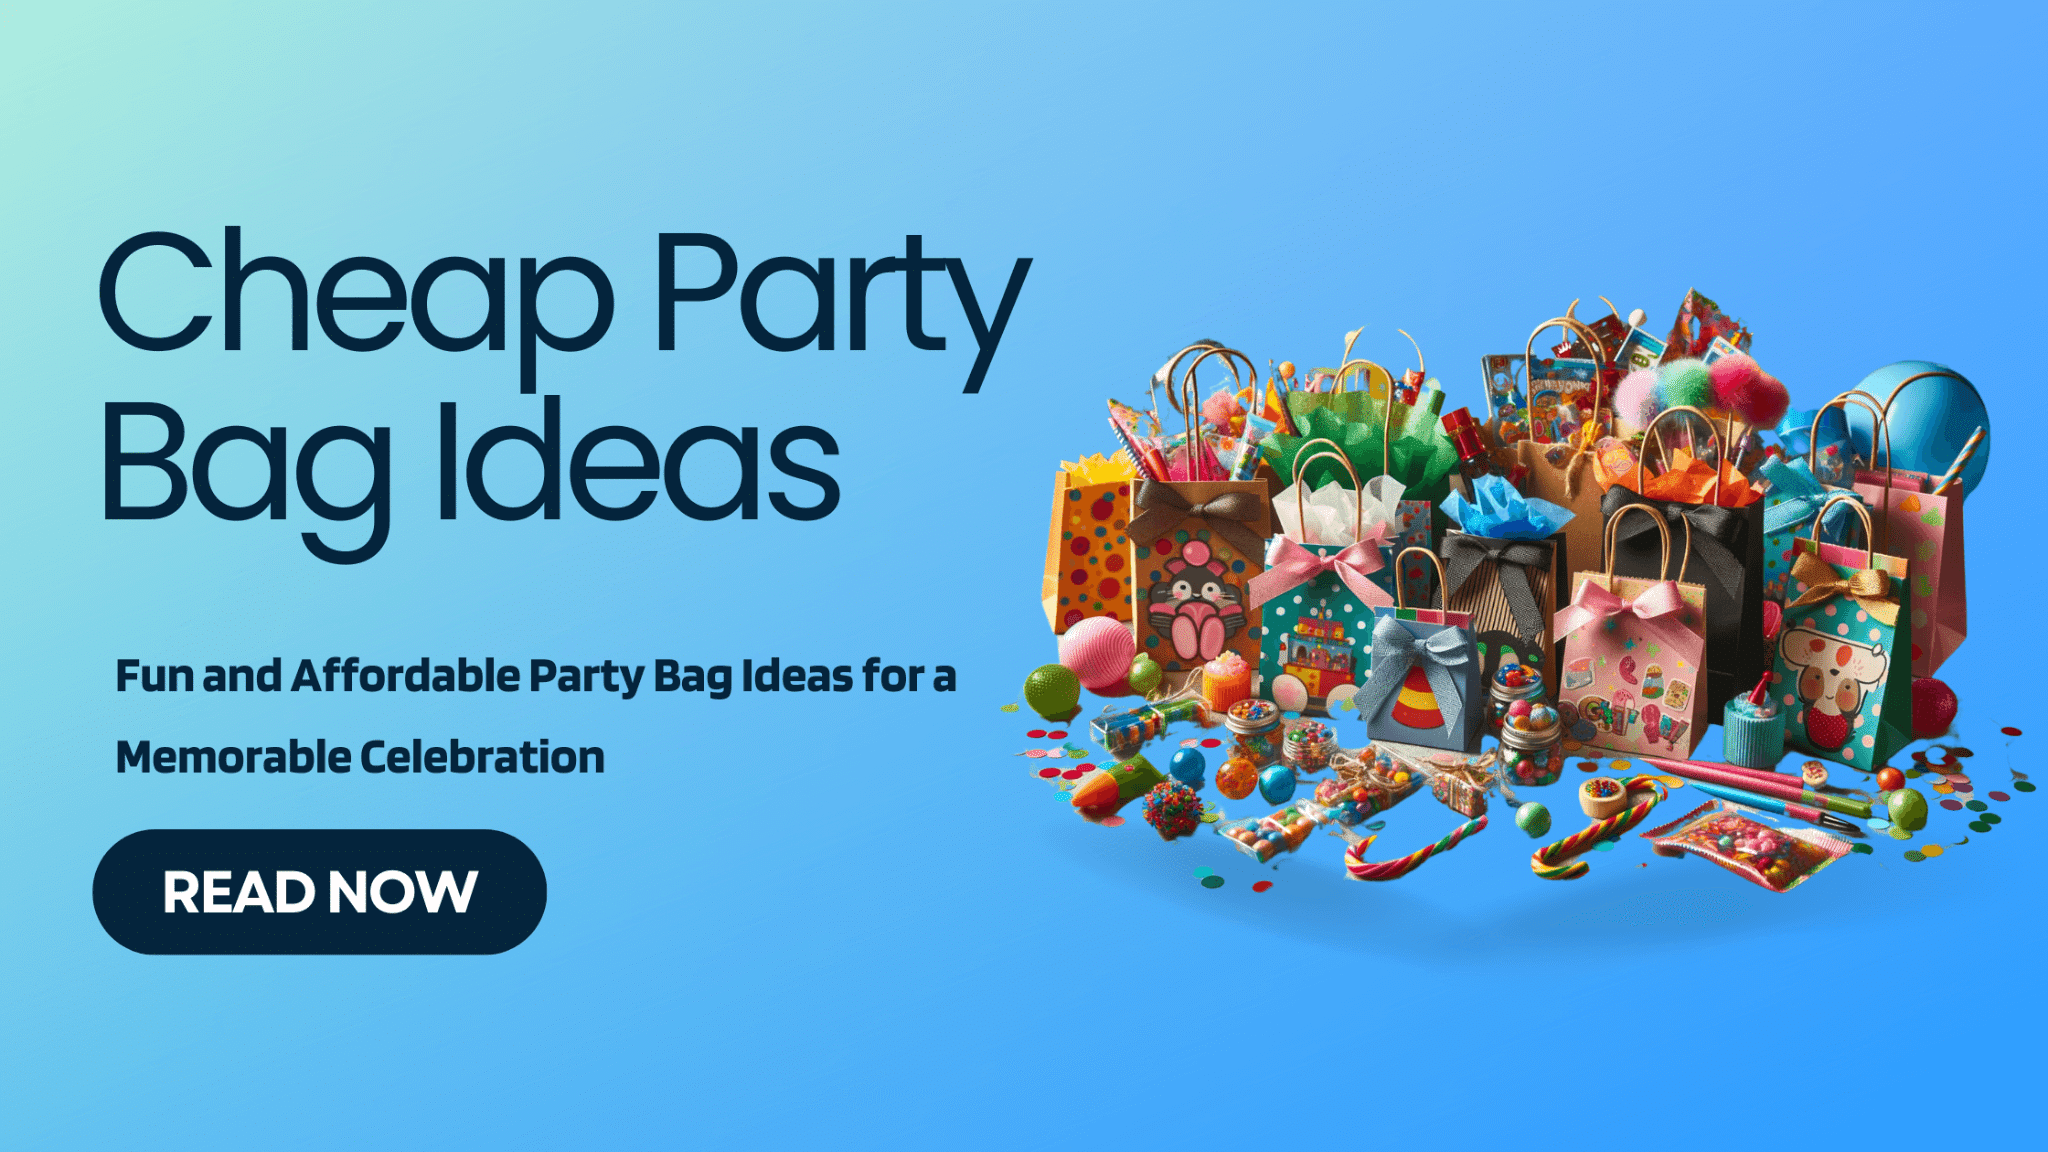 Fun and Affordable Cheap Party Bag Ideas for a Memorable Celebration